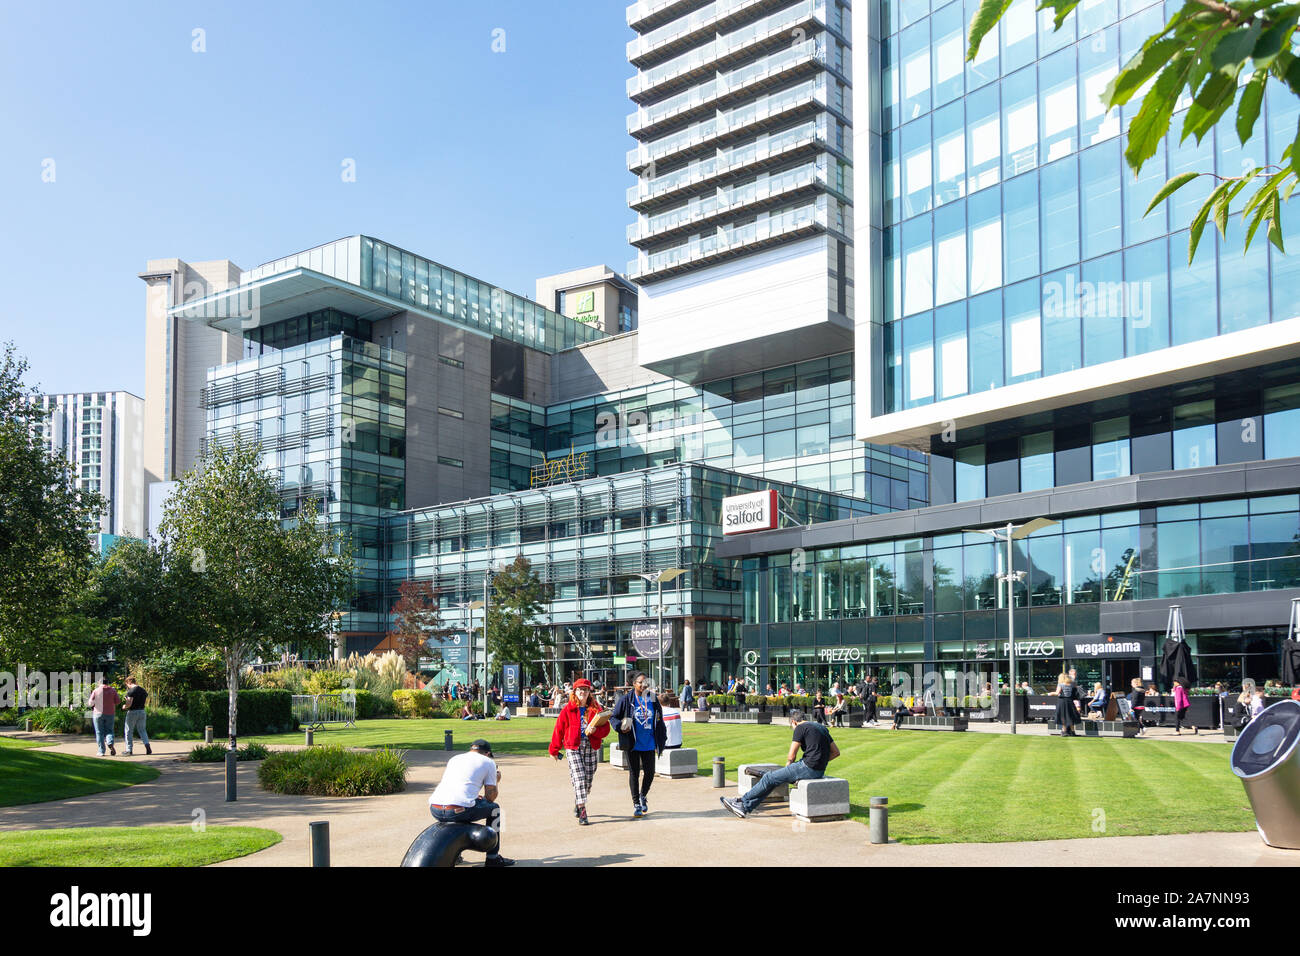 Le Livre vert, MediaCityUK, Salford Quays, Salford, Greater Manchester, Angleterre, Royaume-Uni Banque D'Images